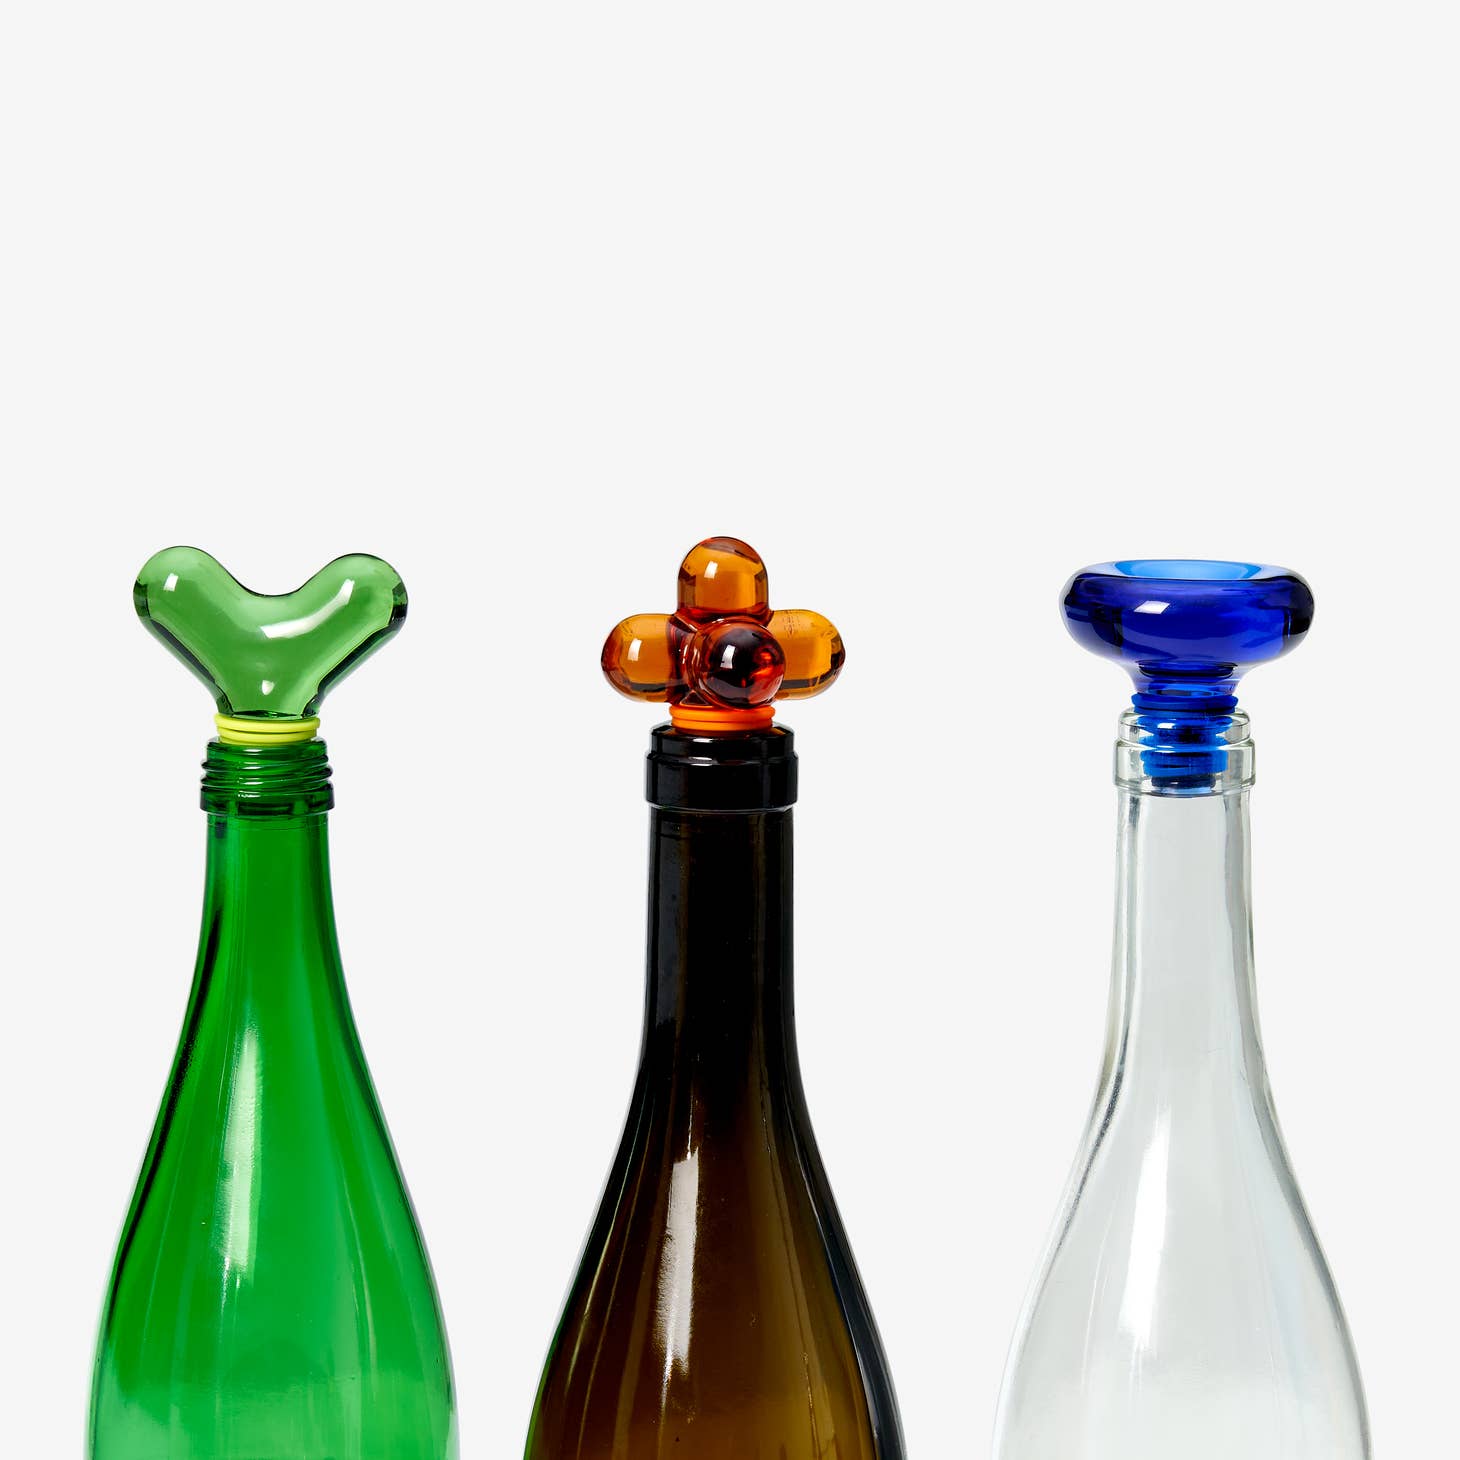 areaware hobknob drink stoppers / Glass bottle stoppers takes their shape from the designer's line of hardware knobs while celebrating the beloved ritual of sharing a drink with friends. Hobknobbing, if you will. Pop it into an open bottle of your favorite beverage to keep it fresh and looking smart.